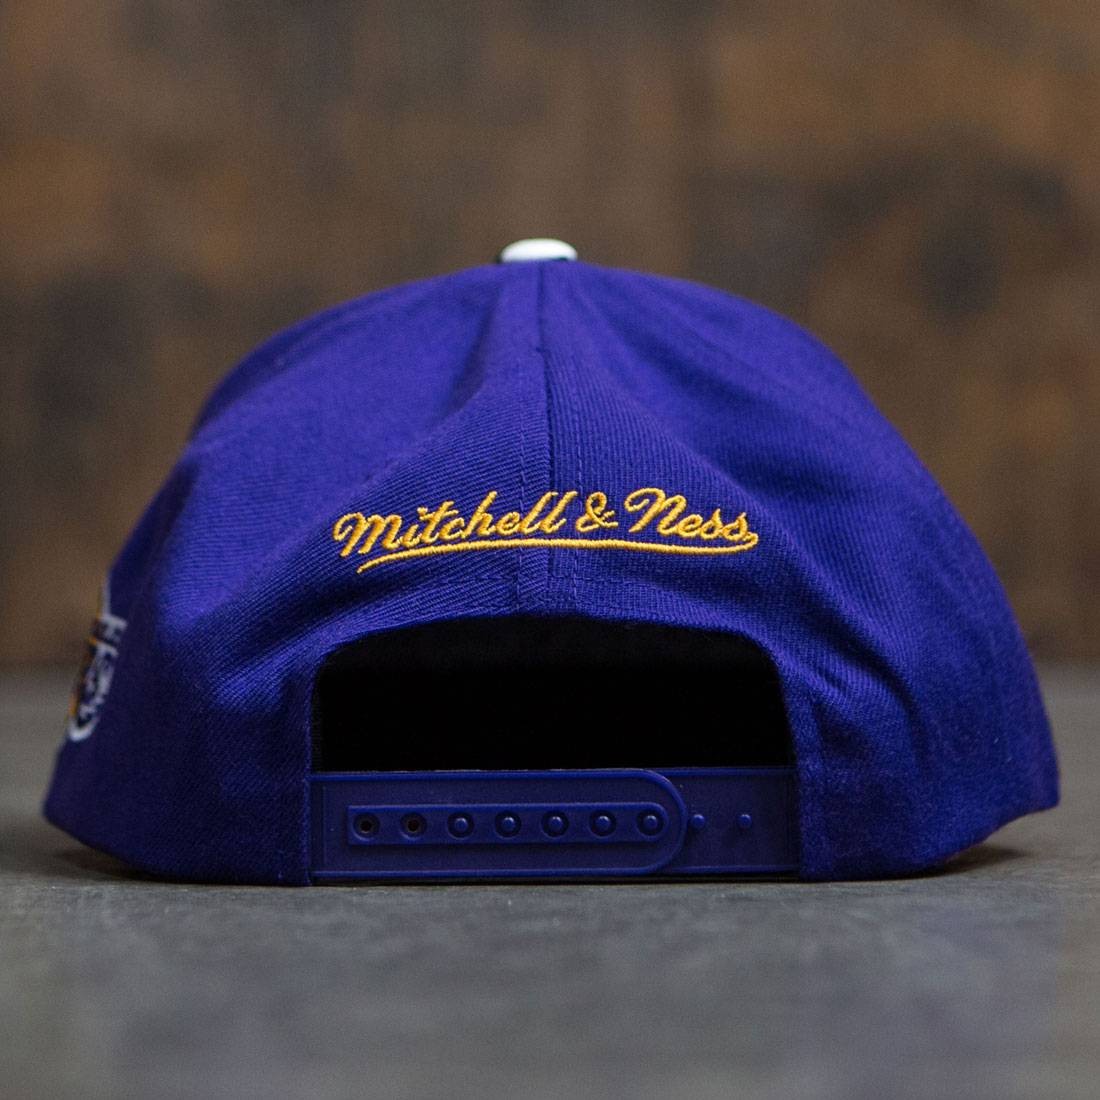 Bait x NBA x Mitchell and Ness Golden State Warriors STA3 Wool Snapback Cap (Blue / Royal)